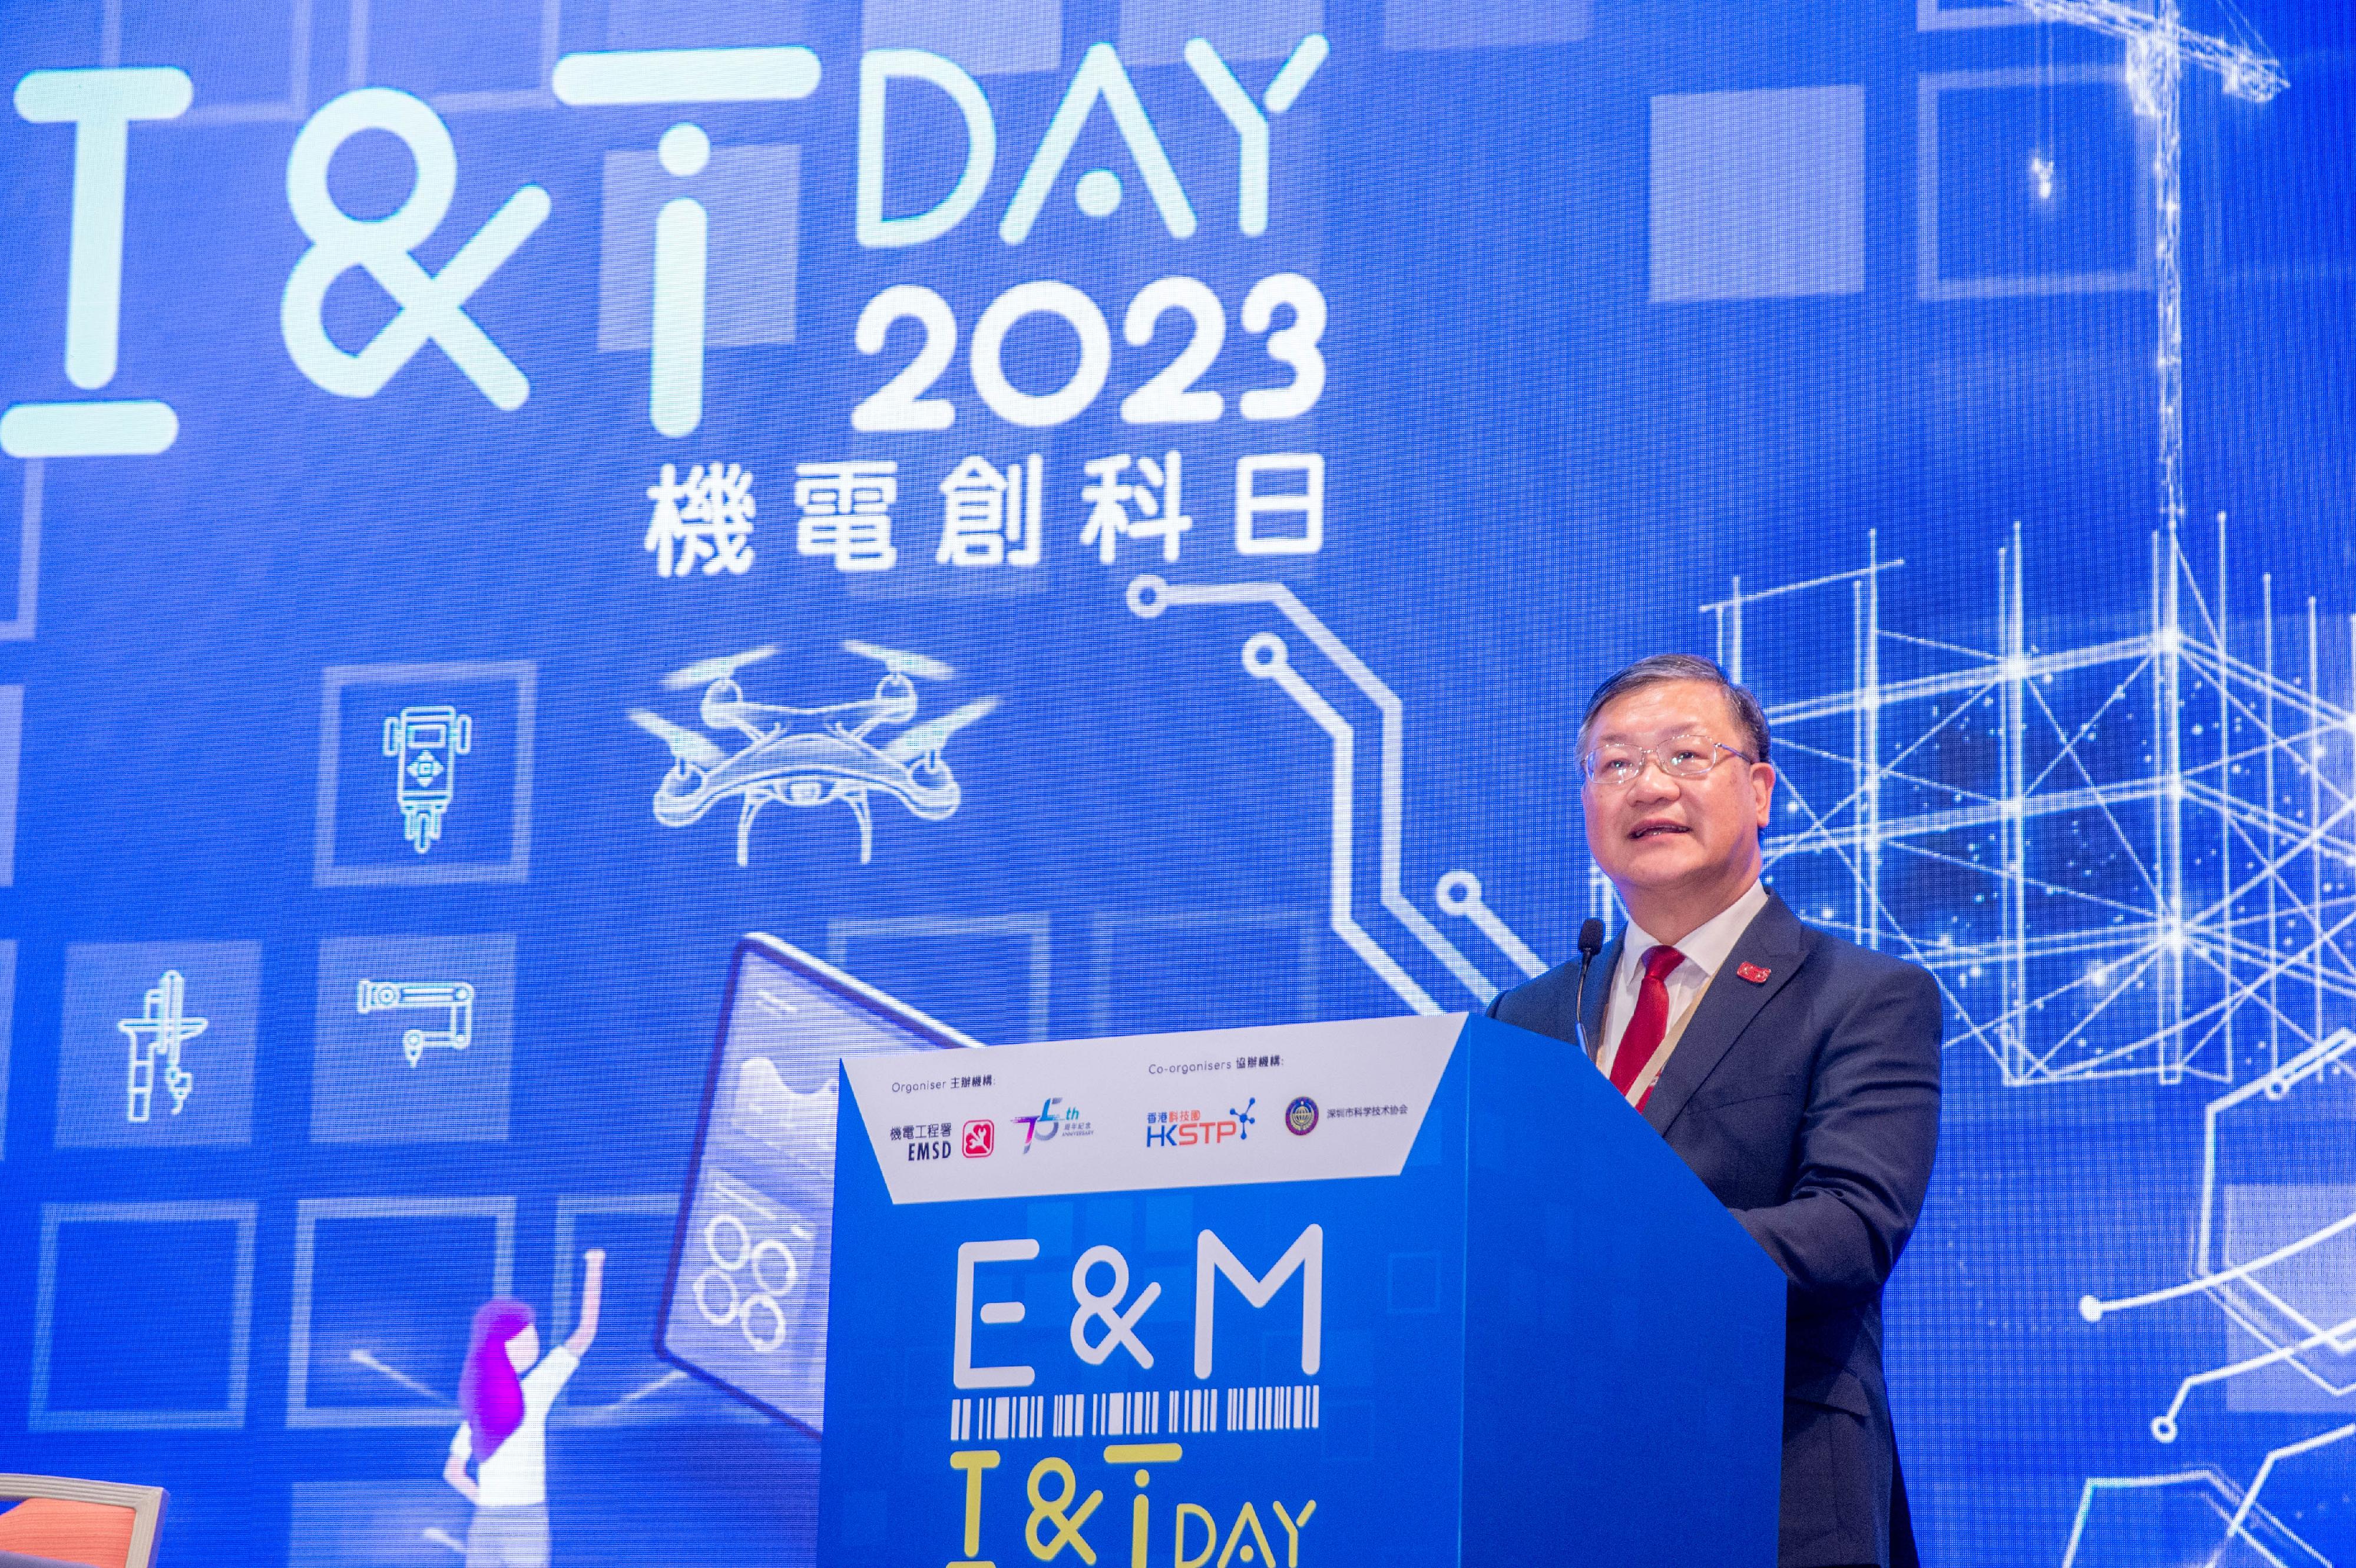 The E&M I&T Day 2023 organised by the Electrical and Mechanical Services Department, with support from the Hong Kong Science and Technology Parks Corporation and the Shenzhen Association for Science and Technology, was launched today (July 31). Photo shows the Director of Electrical and Mechanical Services, Mr Eric Pang, speaking at the event.